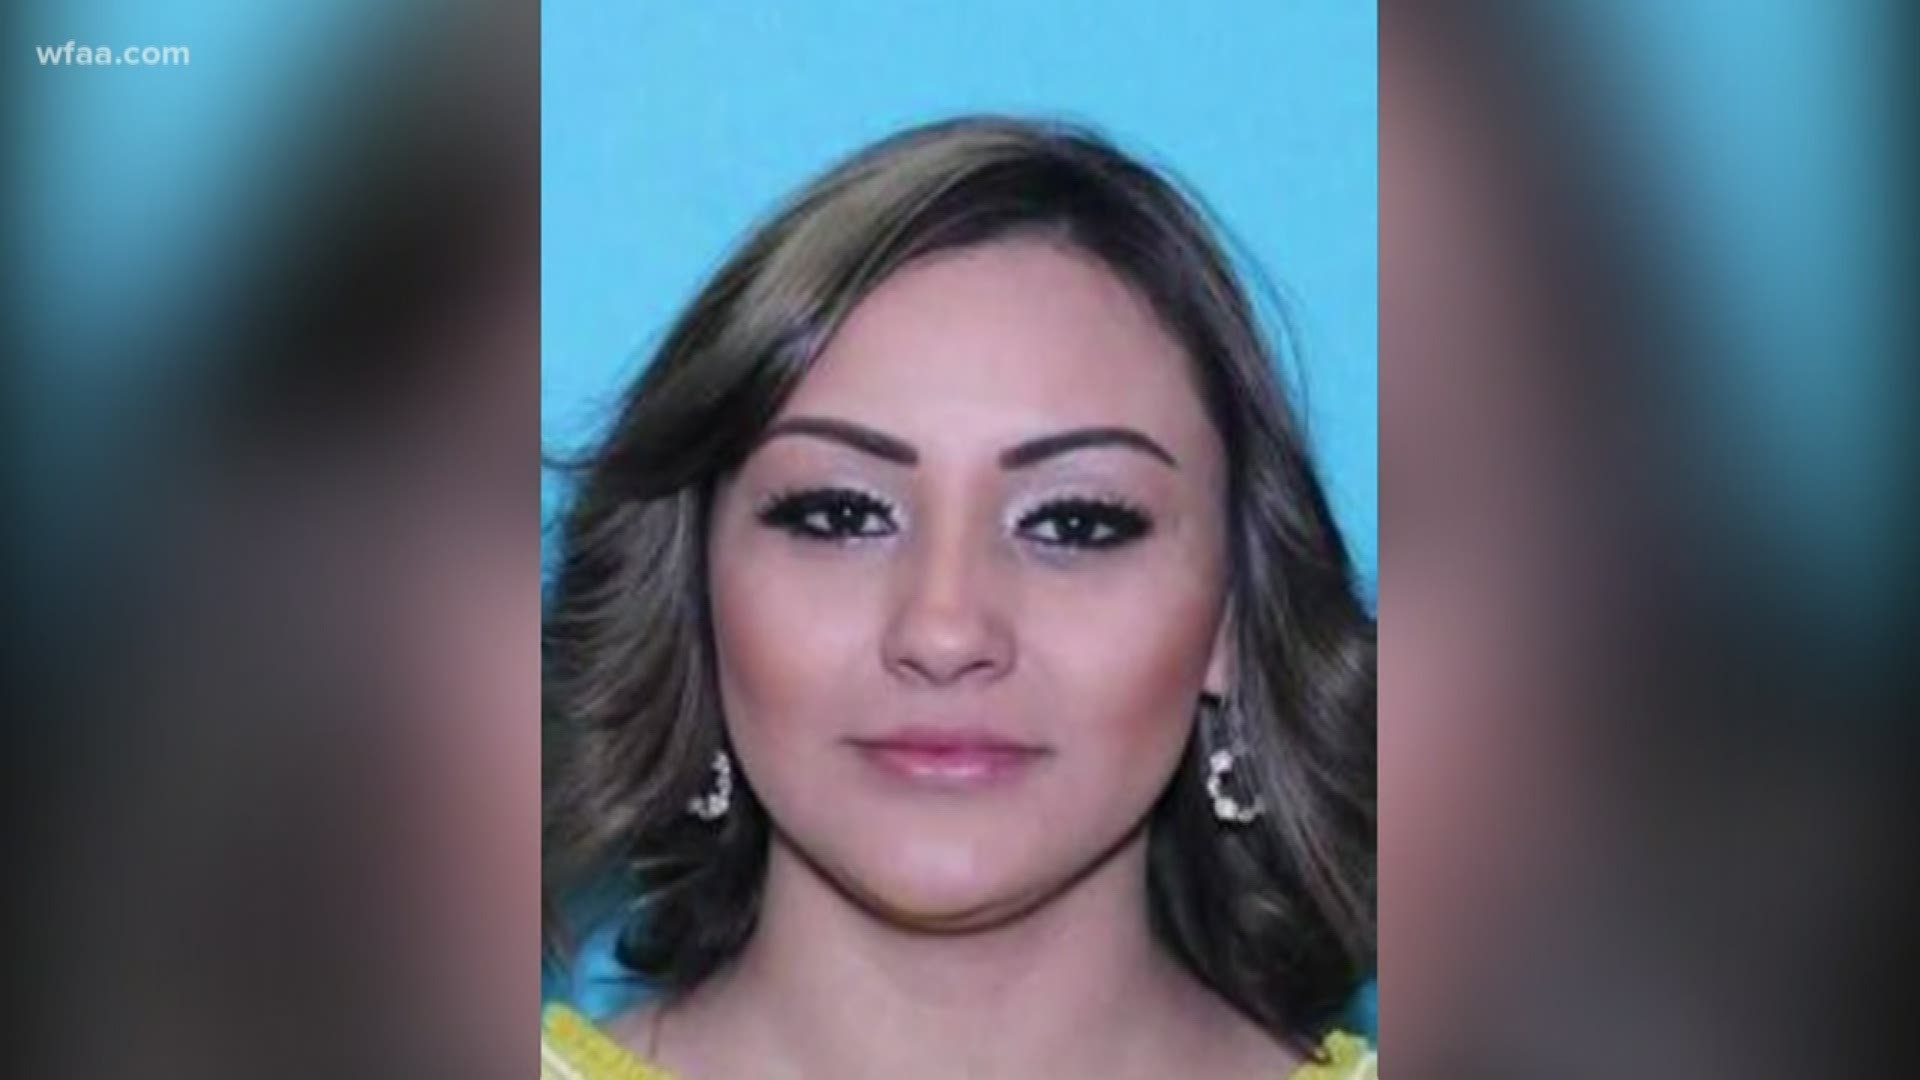 Prisma Reyes was last seen on Wednesday, on surveillance video at an apartment complex in Dallas. She was reported missing after she didn't pick up her child from the babysitter.